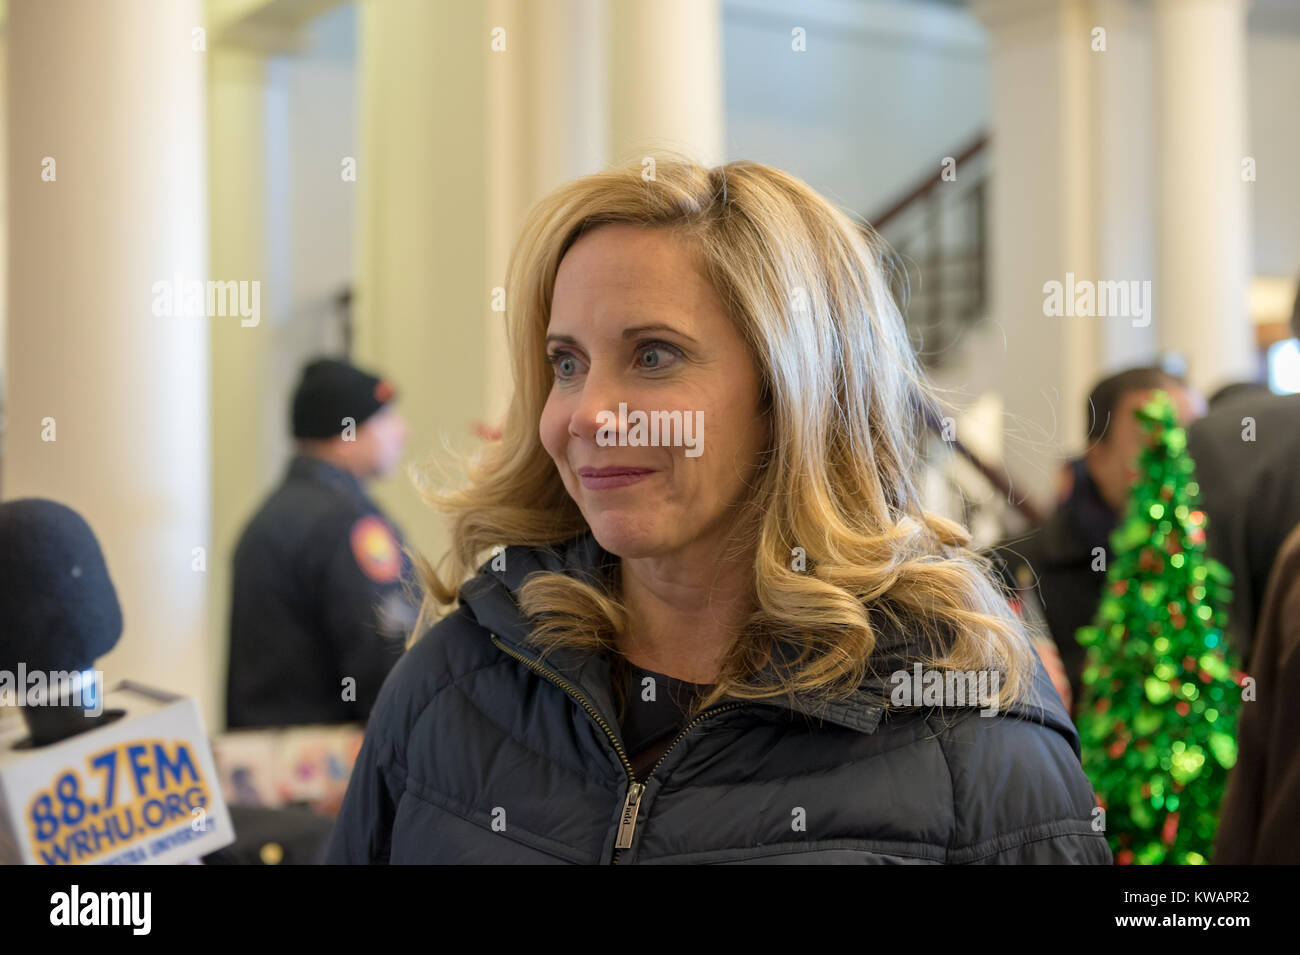 Mineola, New York, USA. January 1, 2018. Town of Hempstead Supervisor LAURA GILLEN, a Democrat, is interviewed by a reporter for Hofstra University's WRHU radio station, after historic swearing-In of Laura Curran as Nassau County Executive. They were in the Theodore Roosevelt Executive & Legislative Building, which the Curran swearing-in was held in front of the entrance outdoors. Gillen's swearing in was held that morning at Hofstra University. Stock Photo